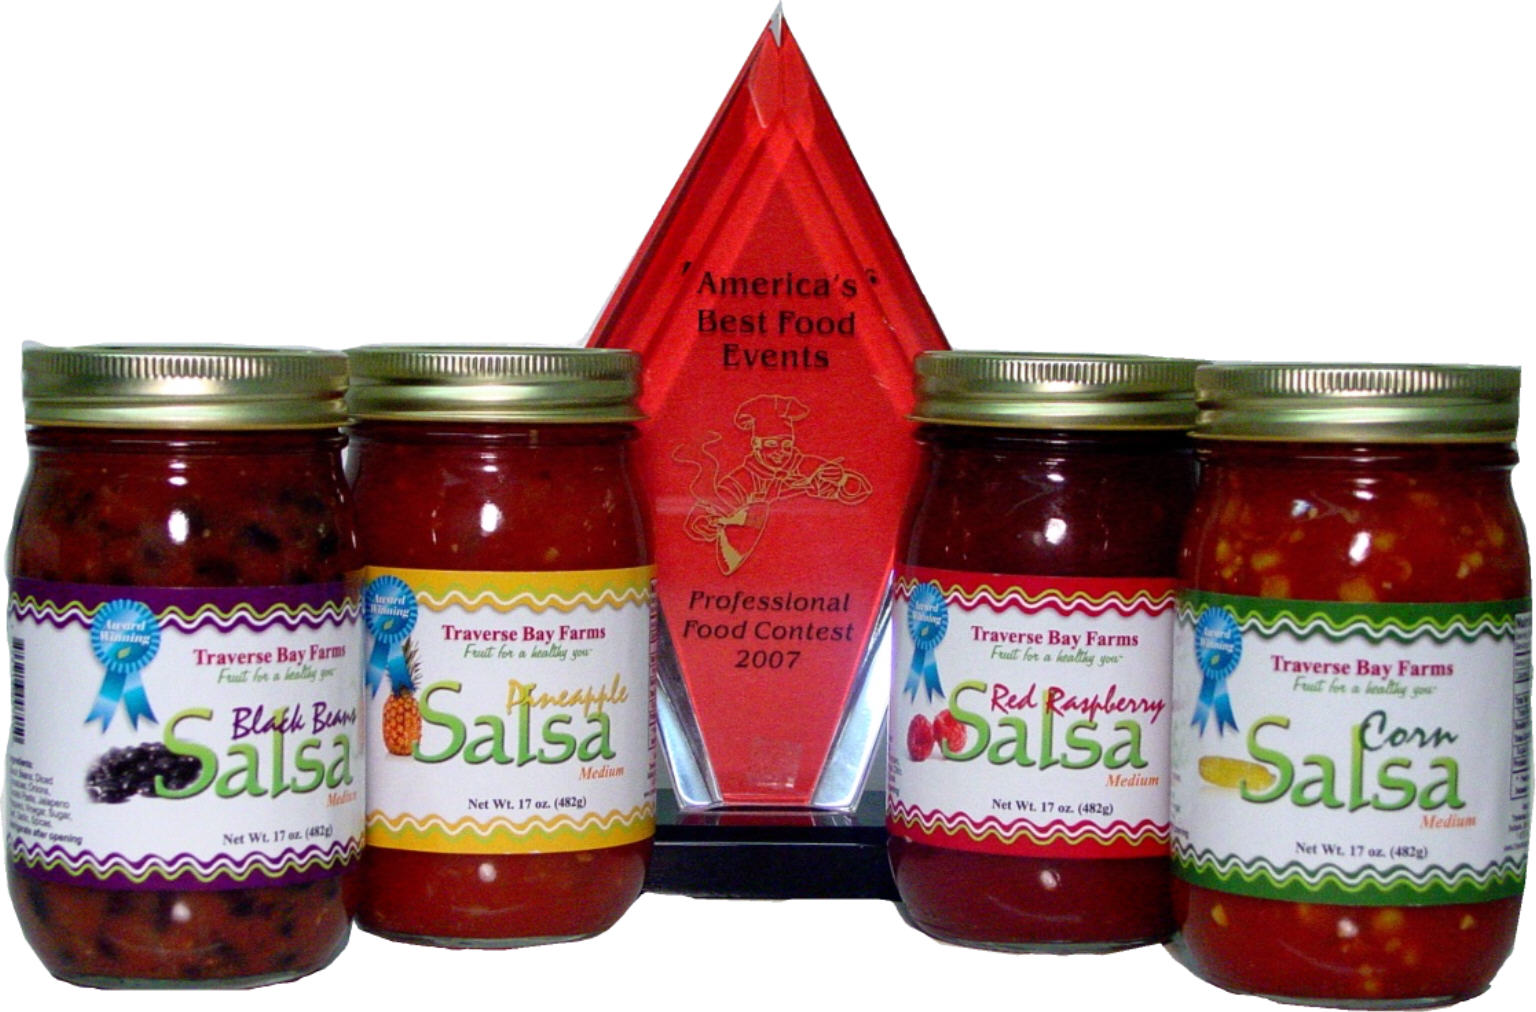 Traverse Bay Farms Continues Its Commitment to Sustainability and Health with the Use of Glass Jars